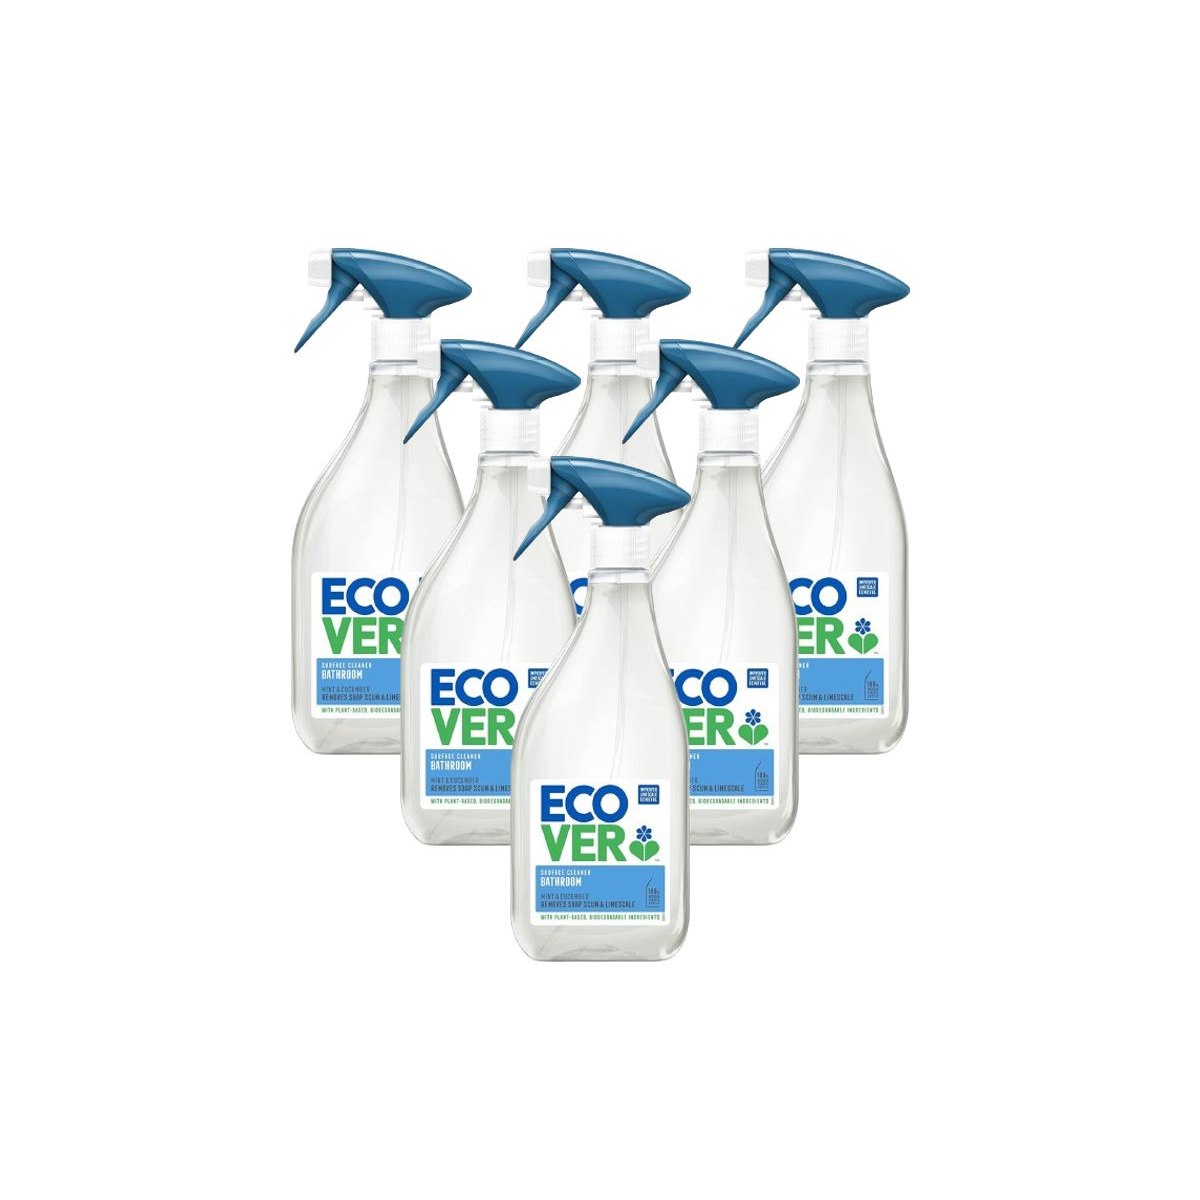 Case of 6 x Ecover Bathroom Cleaner Spray Mint and Cucumber 500ml